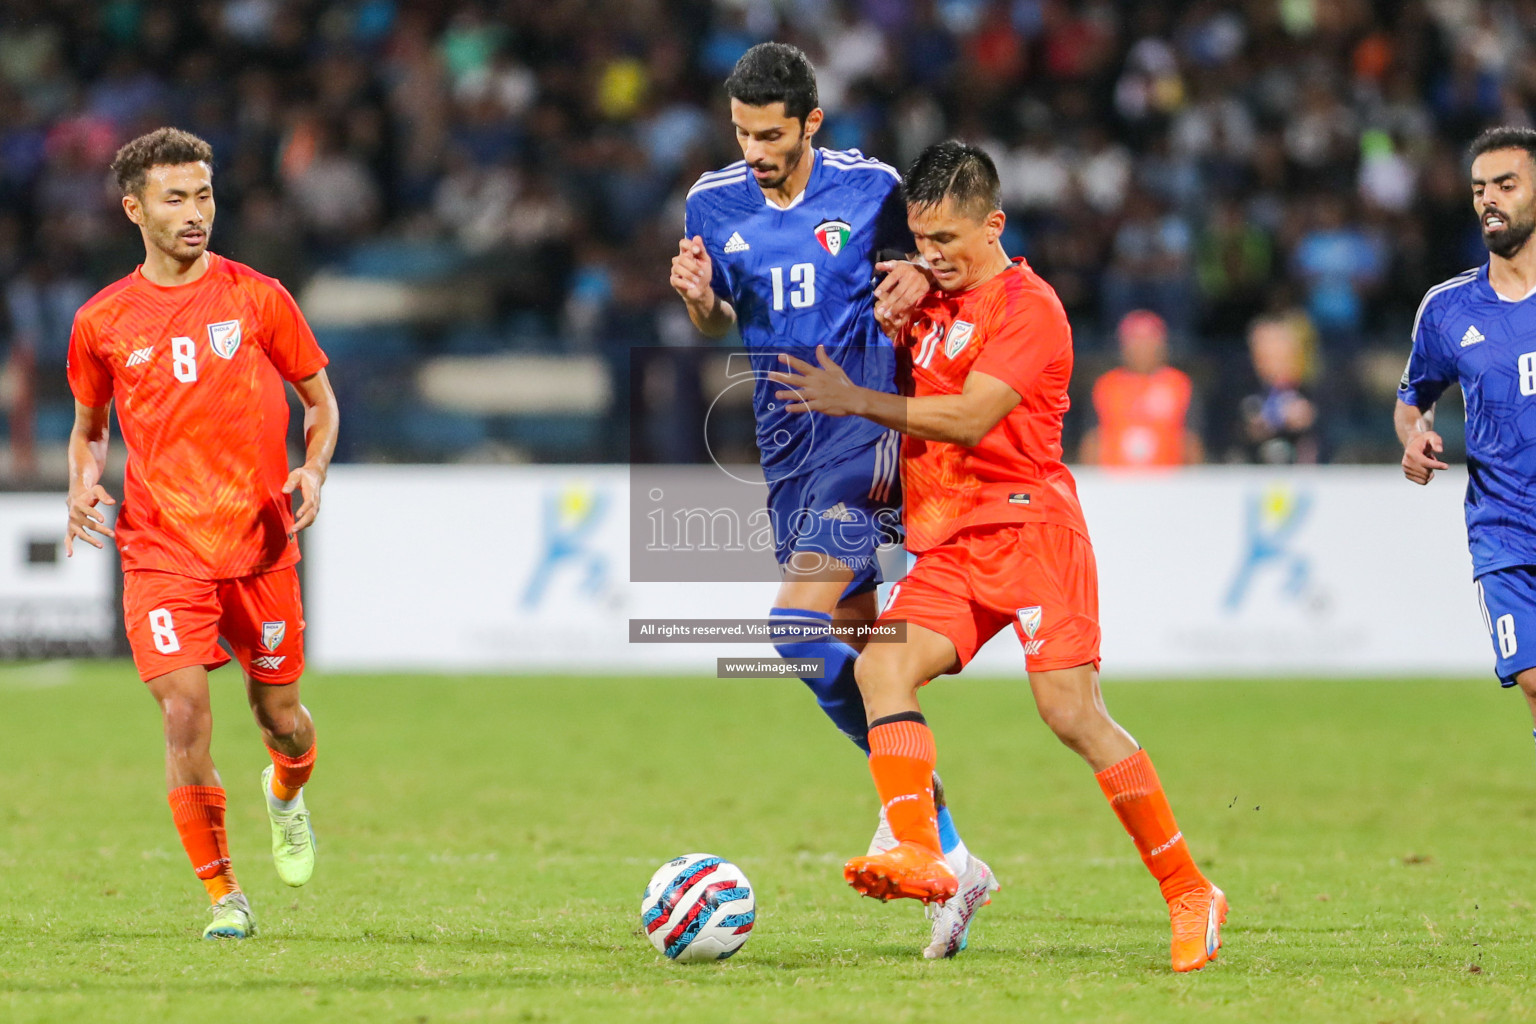 Kuwait vs India in the Final of SAFF Championship 2023 held in Sree Kanteerava Stadium, Bengaluru, India, on Tuesday, 4th July 2023. Photos: Hassan Simah / images.mv